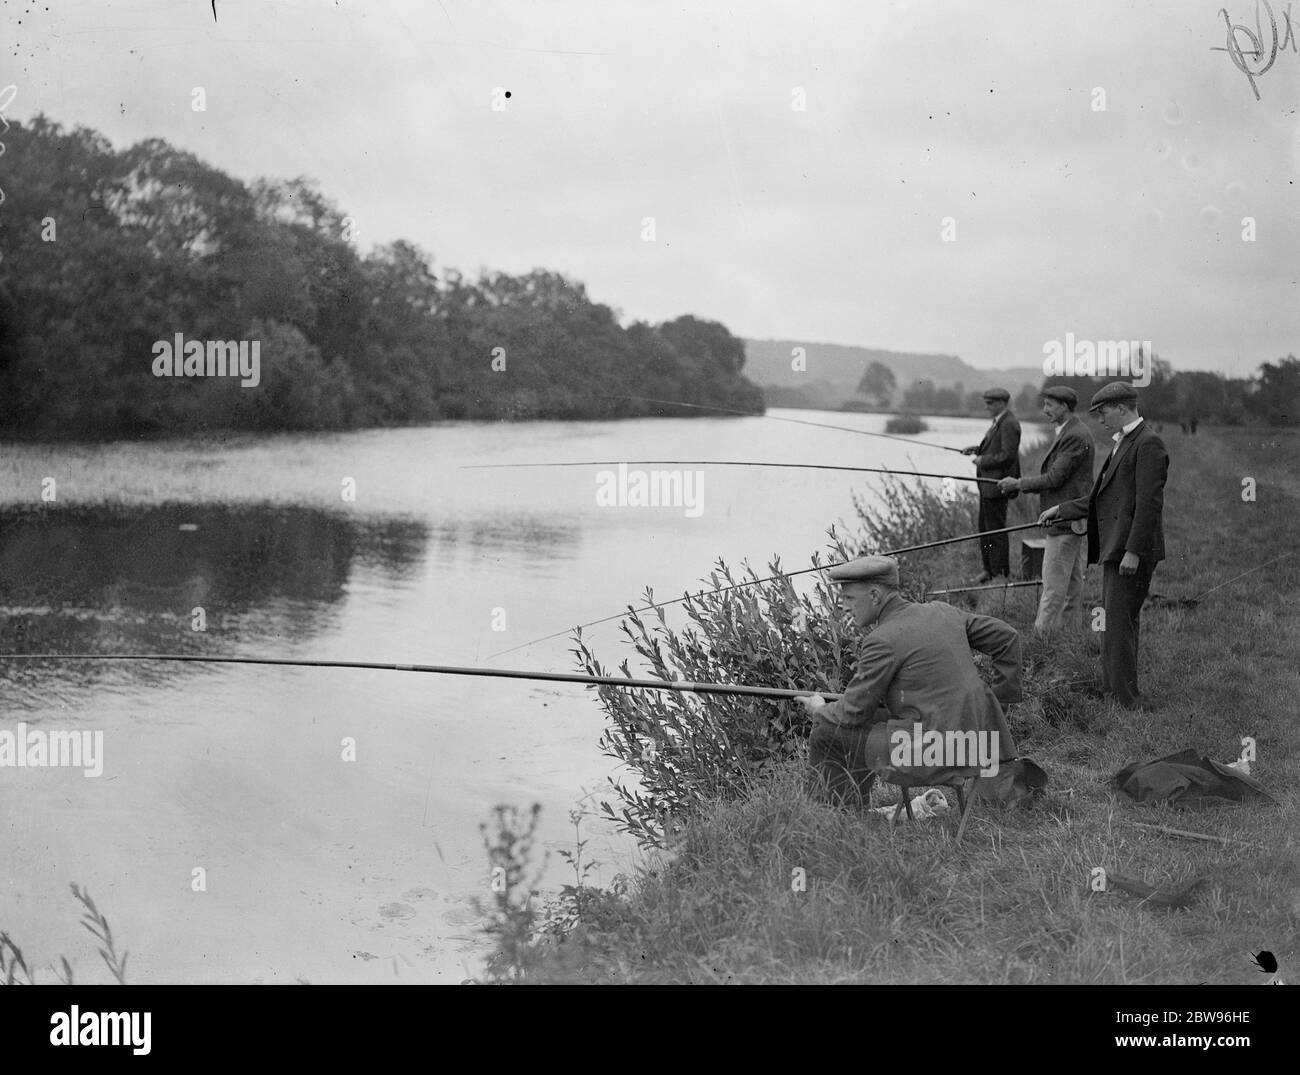 The first catch at Pangbourne fishing festival . Hundreds of fisherman of all ages took part in a great festival , on the river Thames at Pangbourne , Berkshire . Three anglers fishing on the Thames bank at Pangbourne during the festival . 23 July 1932 Stock Photo